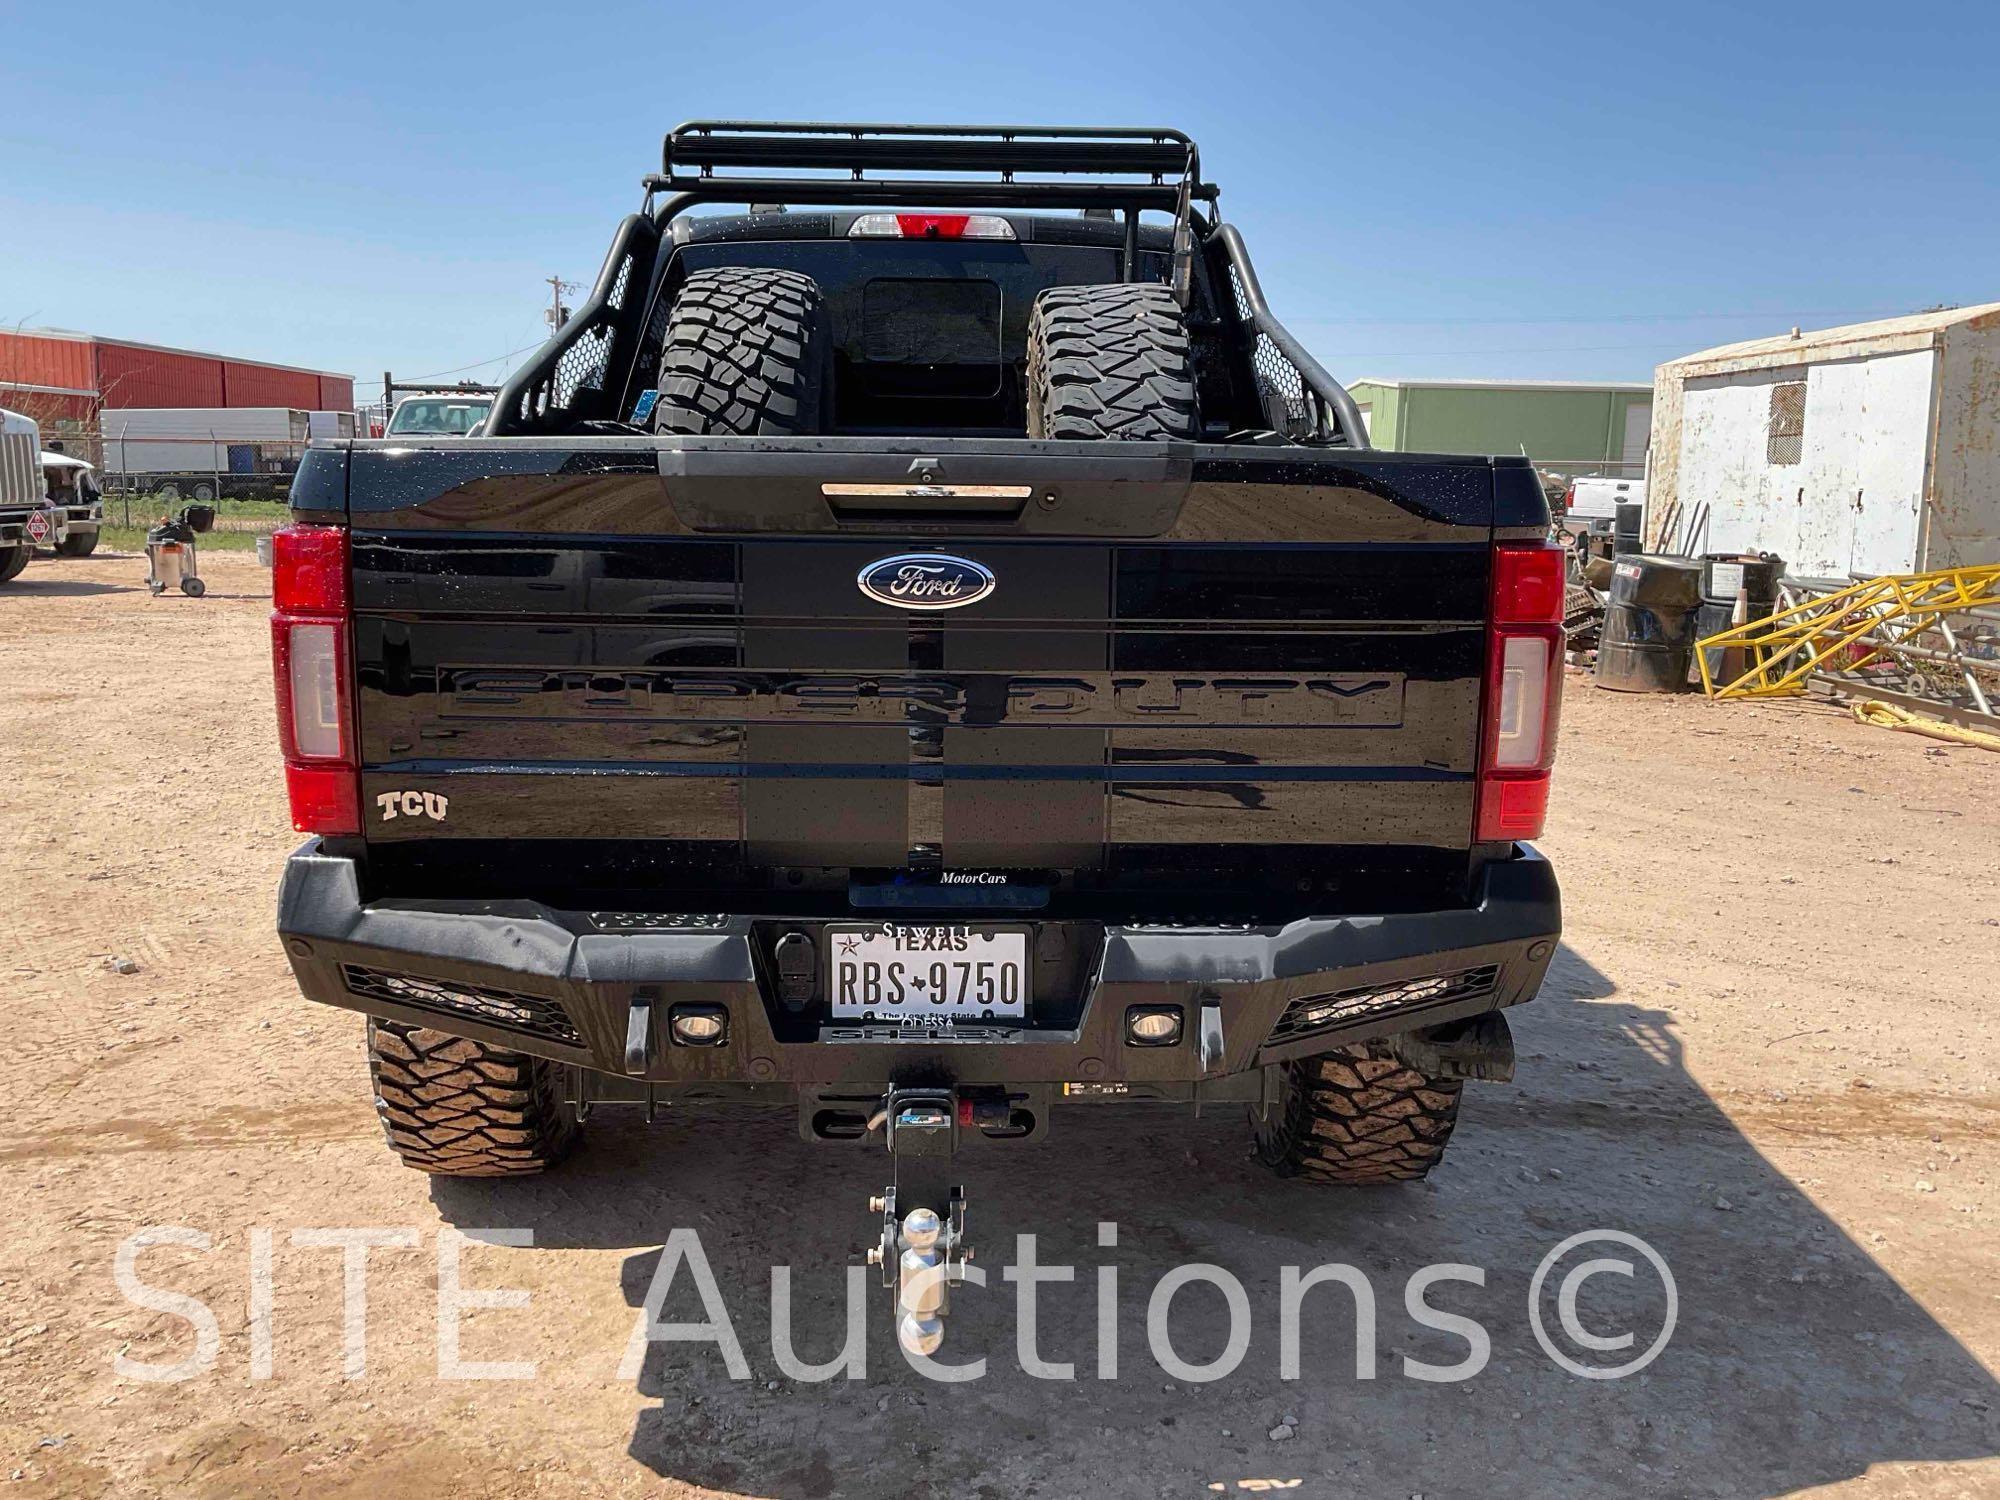 2021 Ford F250 SD Shelby Super Baja Crew Cab Pickup Truck